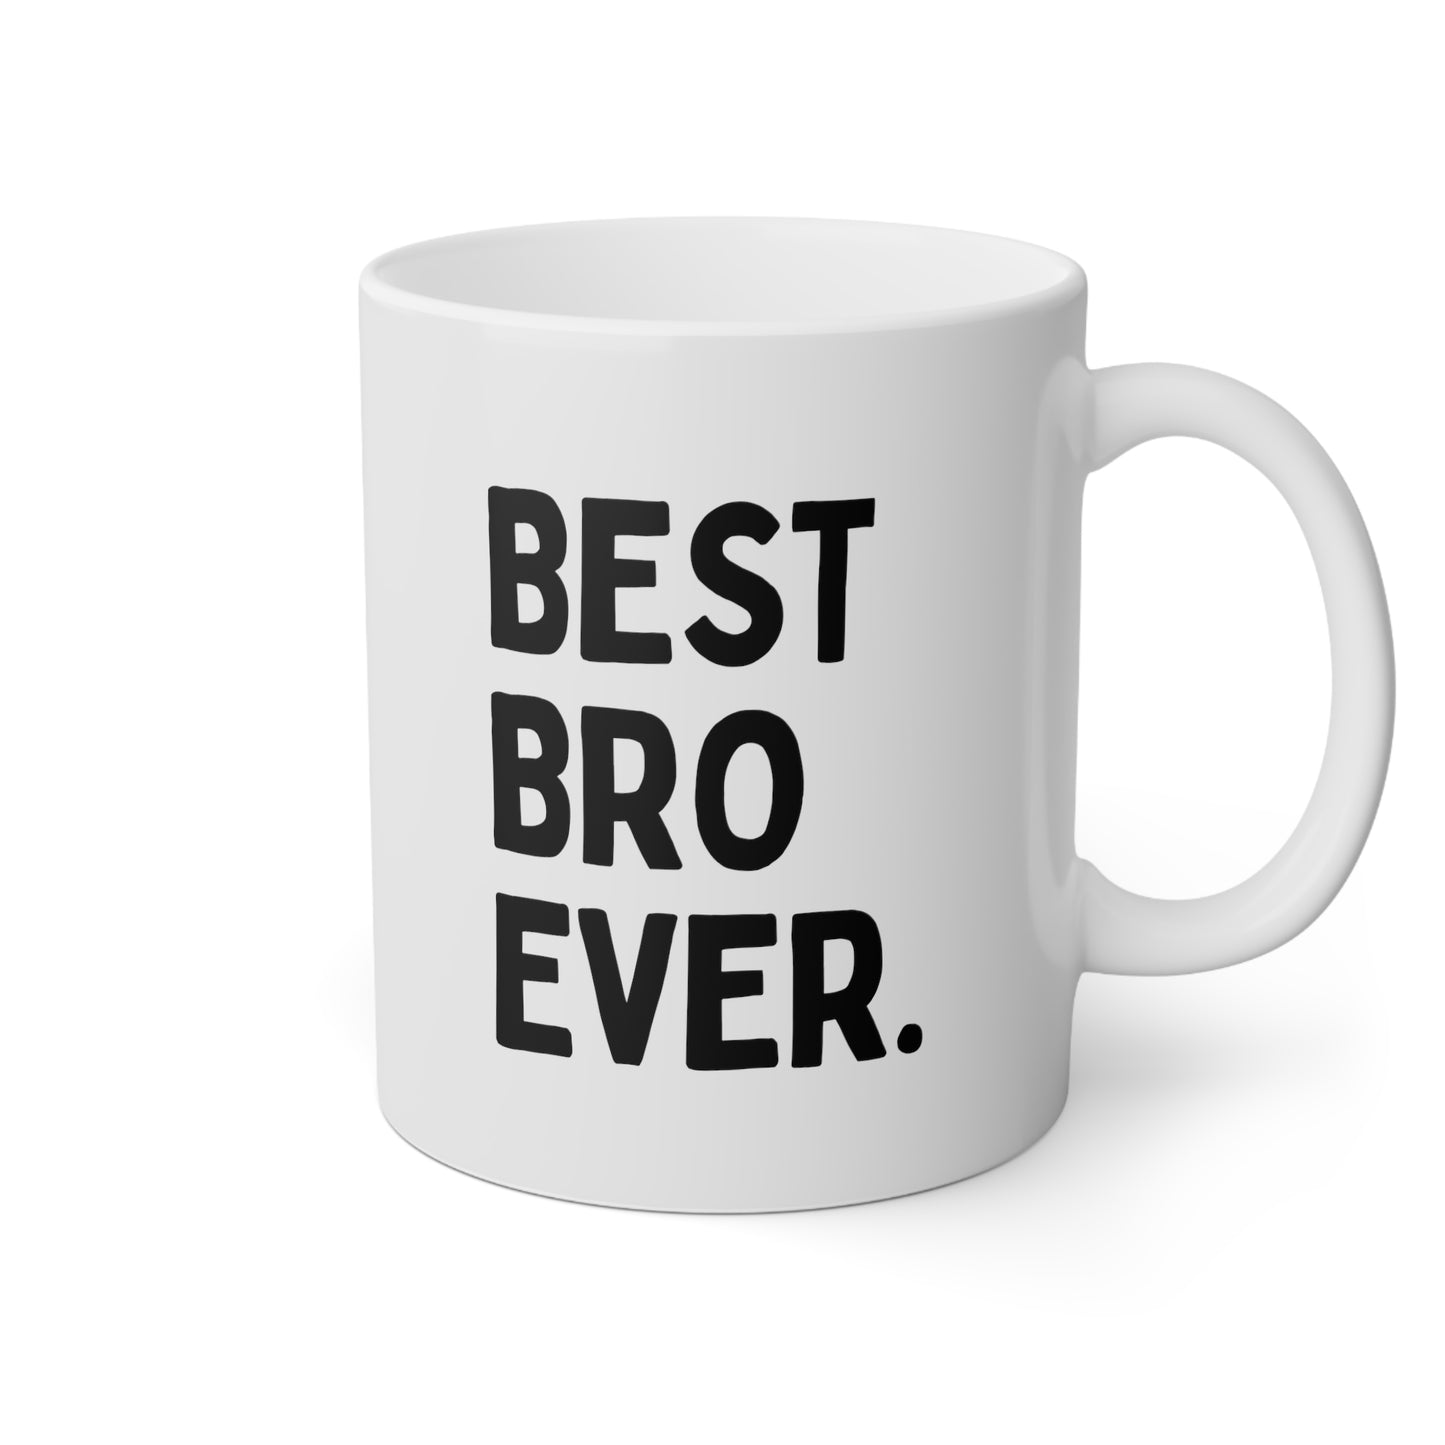 Best Bro Ever 11oz white funny large coffee mug gift for brother best friend husband men fathers day bff dad waveywares wavey wares wavywares wavy wares